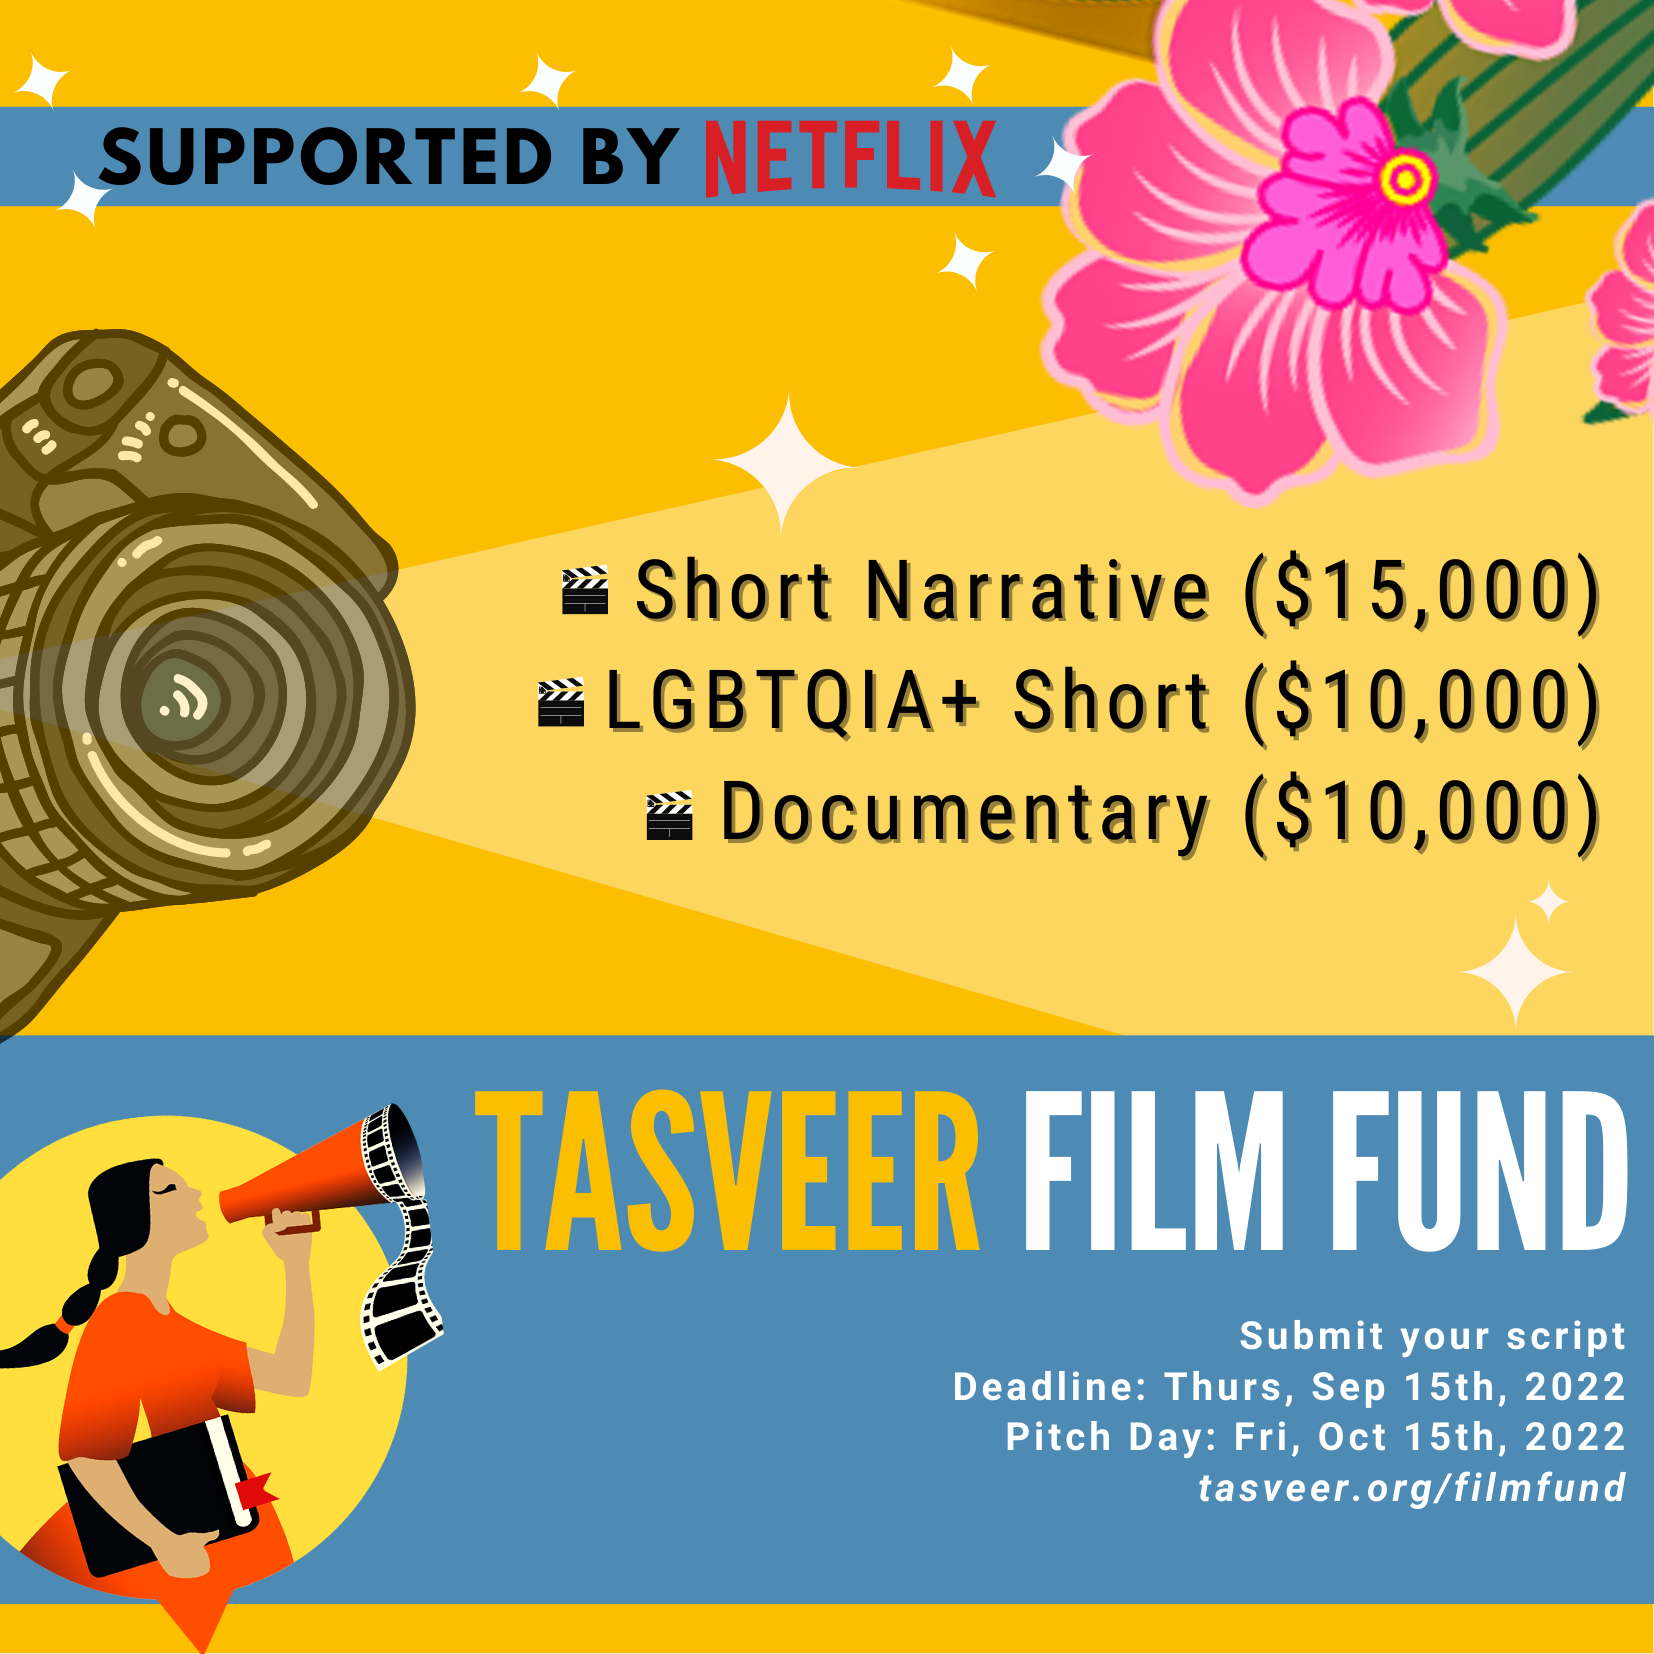 Tasveer Film Fund With Increased Funding And New Track For Feature - About Netflix